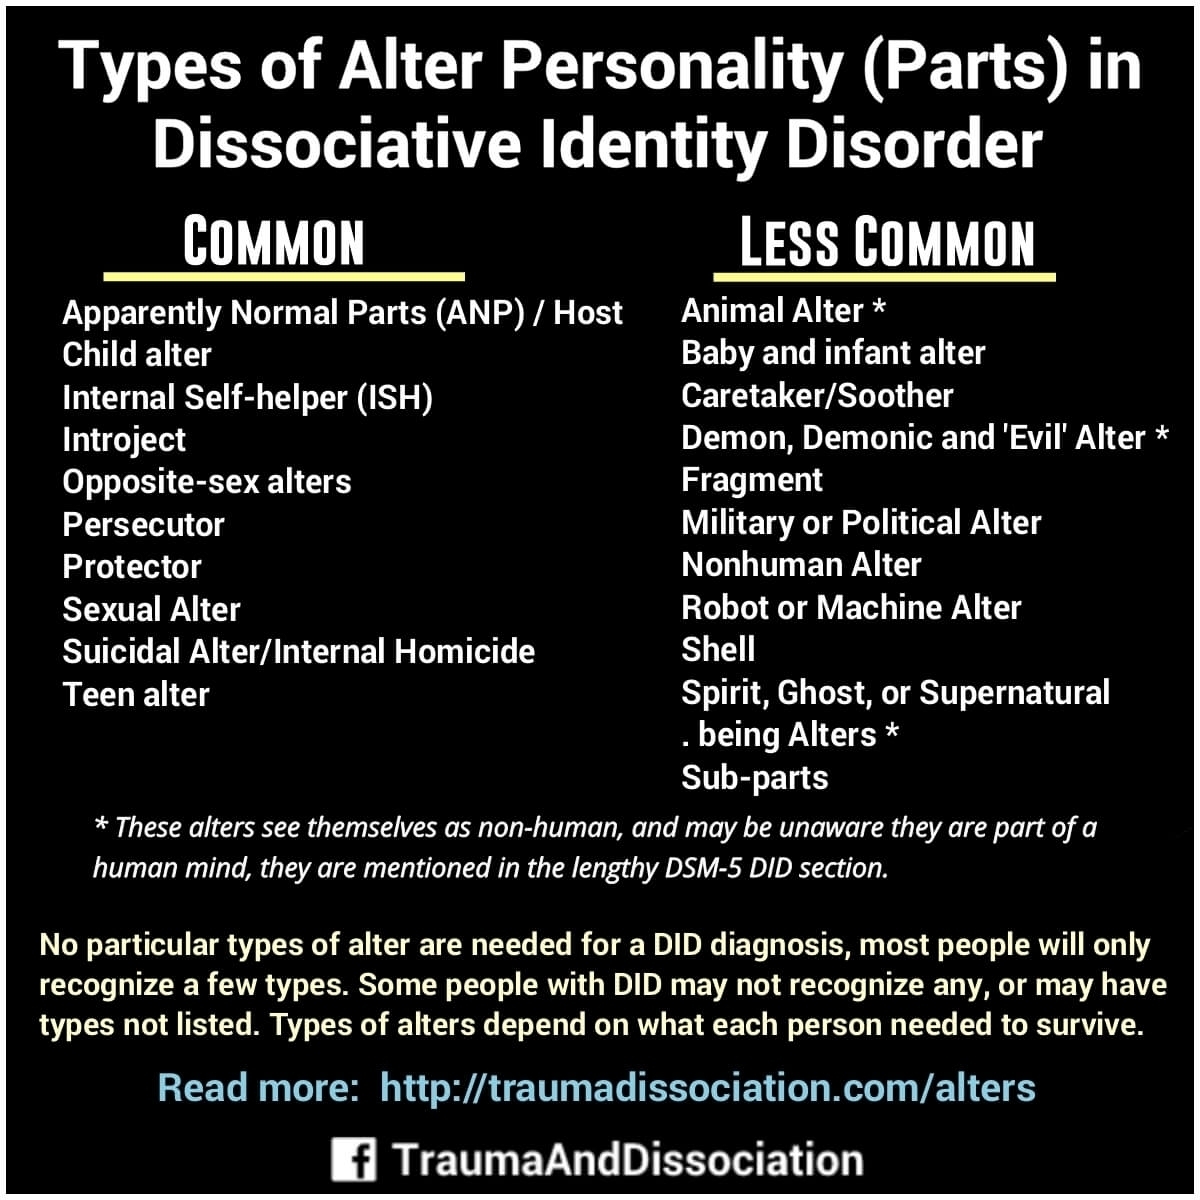 Types of Alter Personality (Parts) in Dissociative Identity Disorder